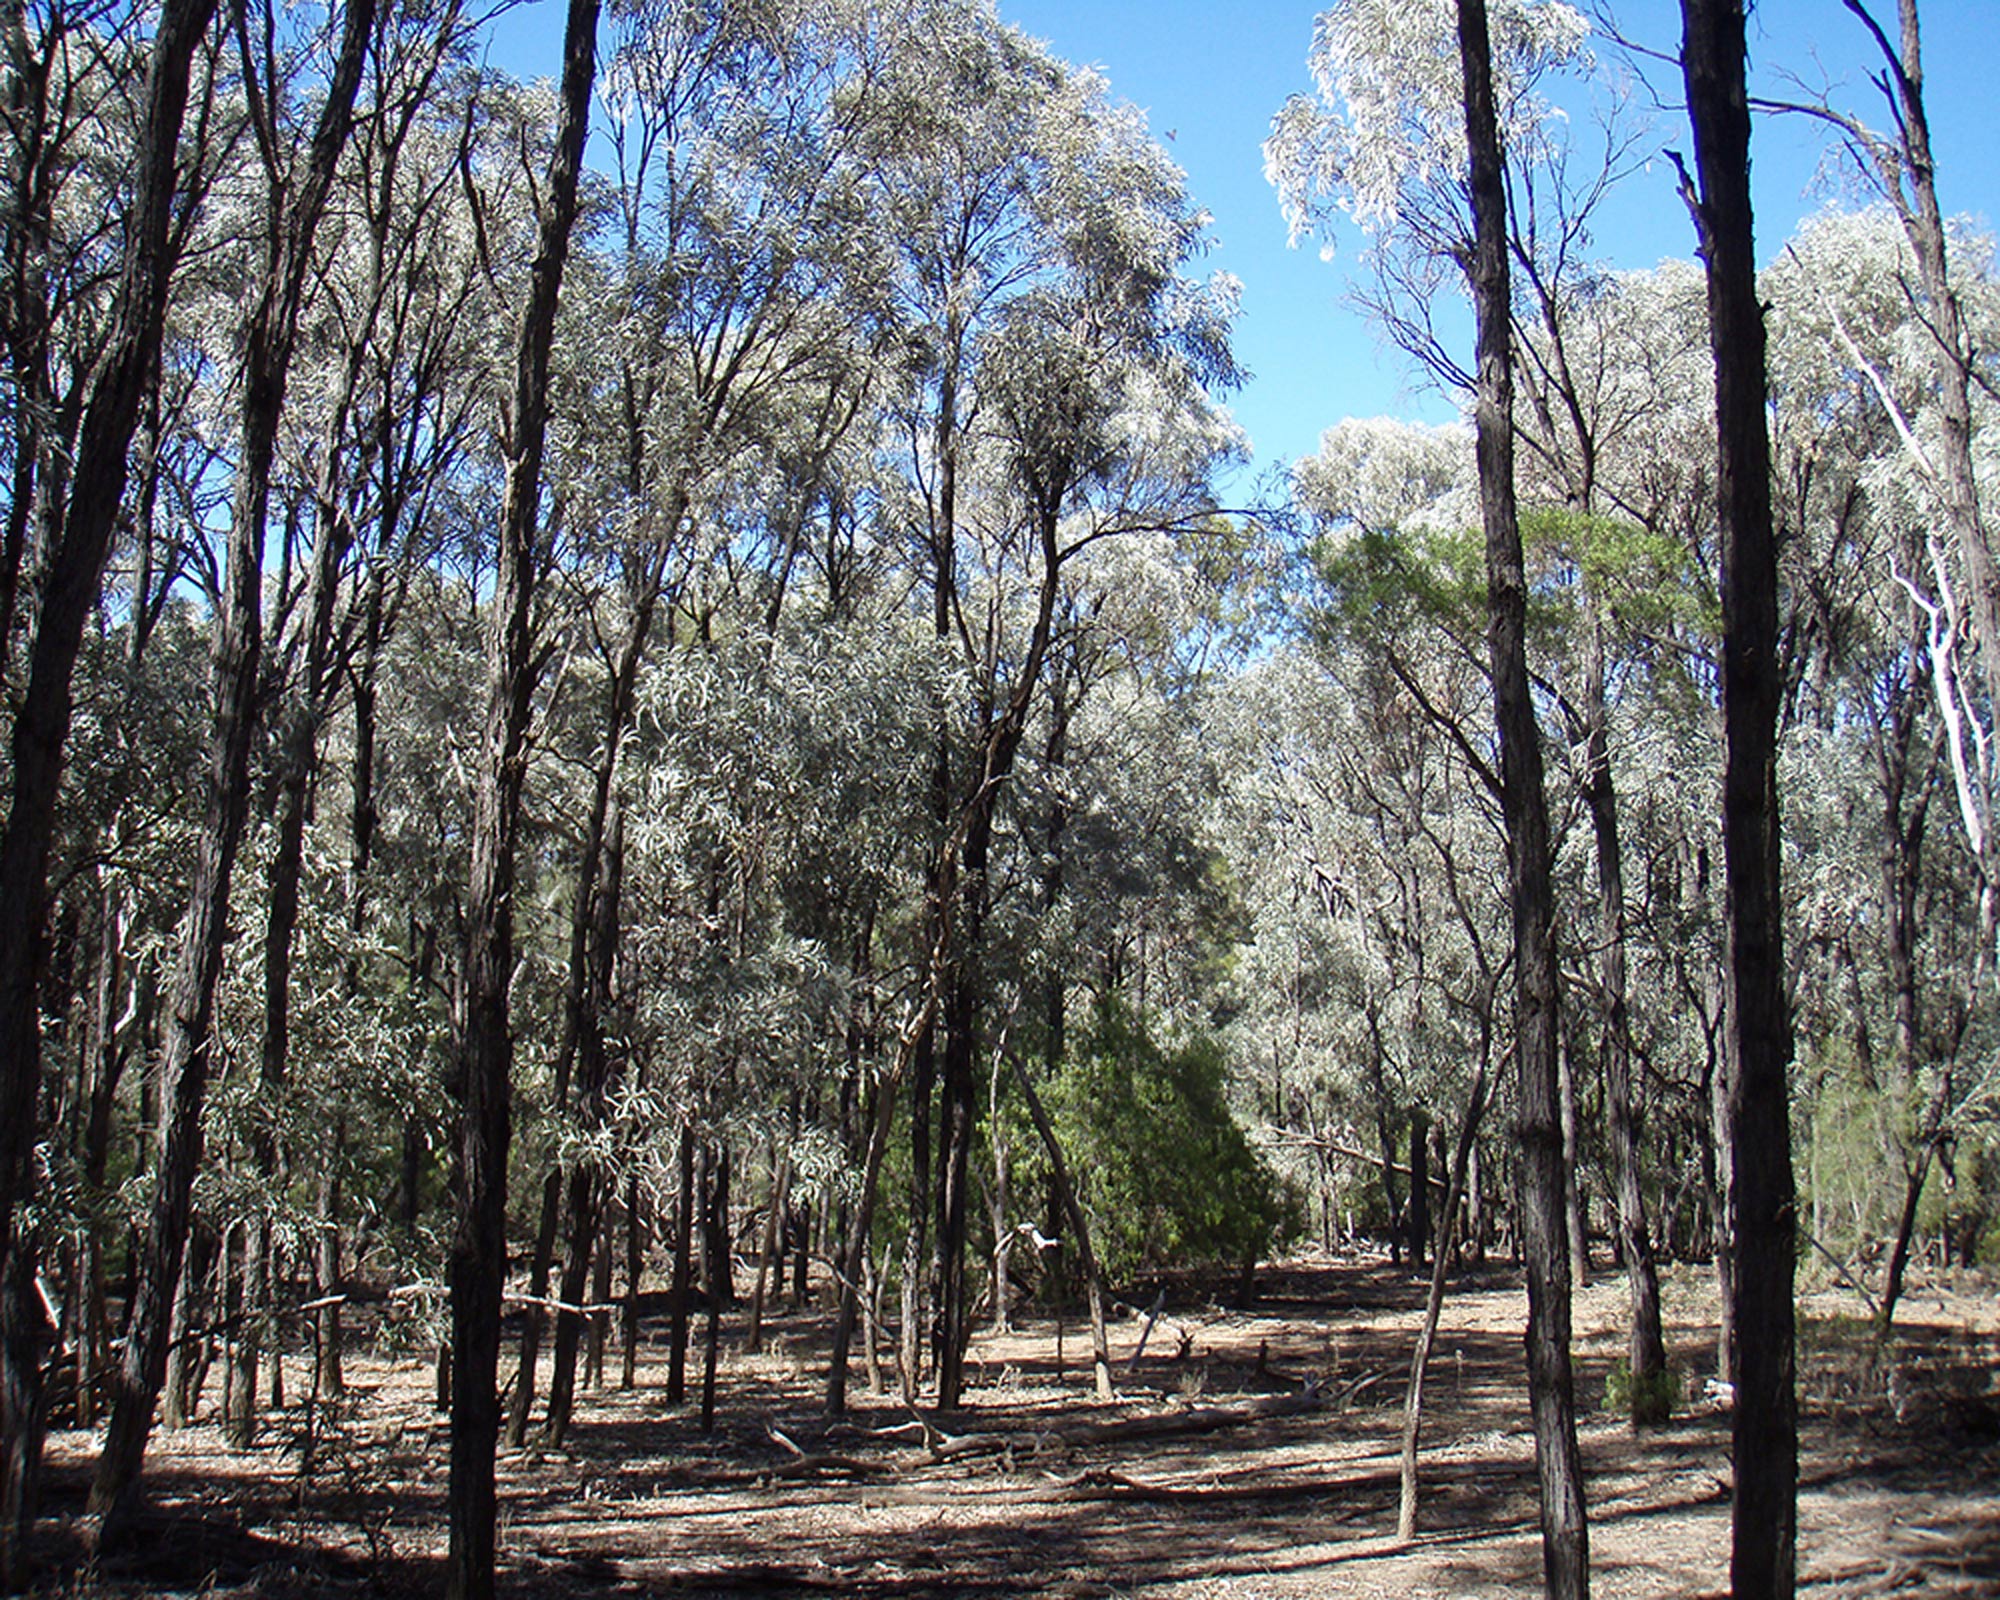 Brigalow forest